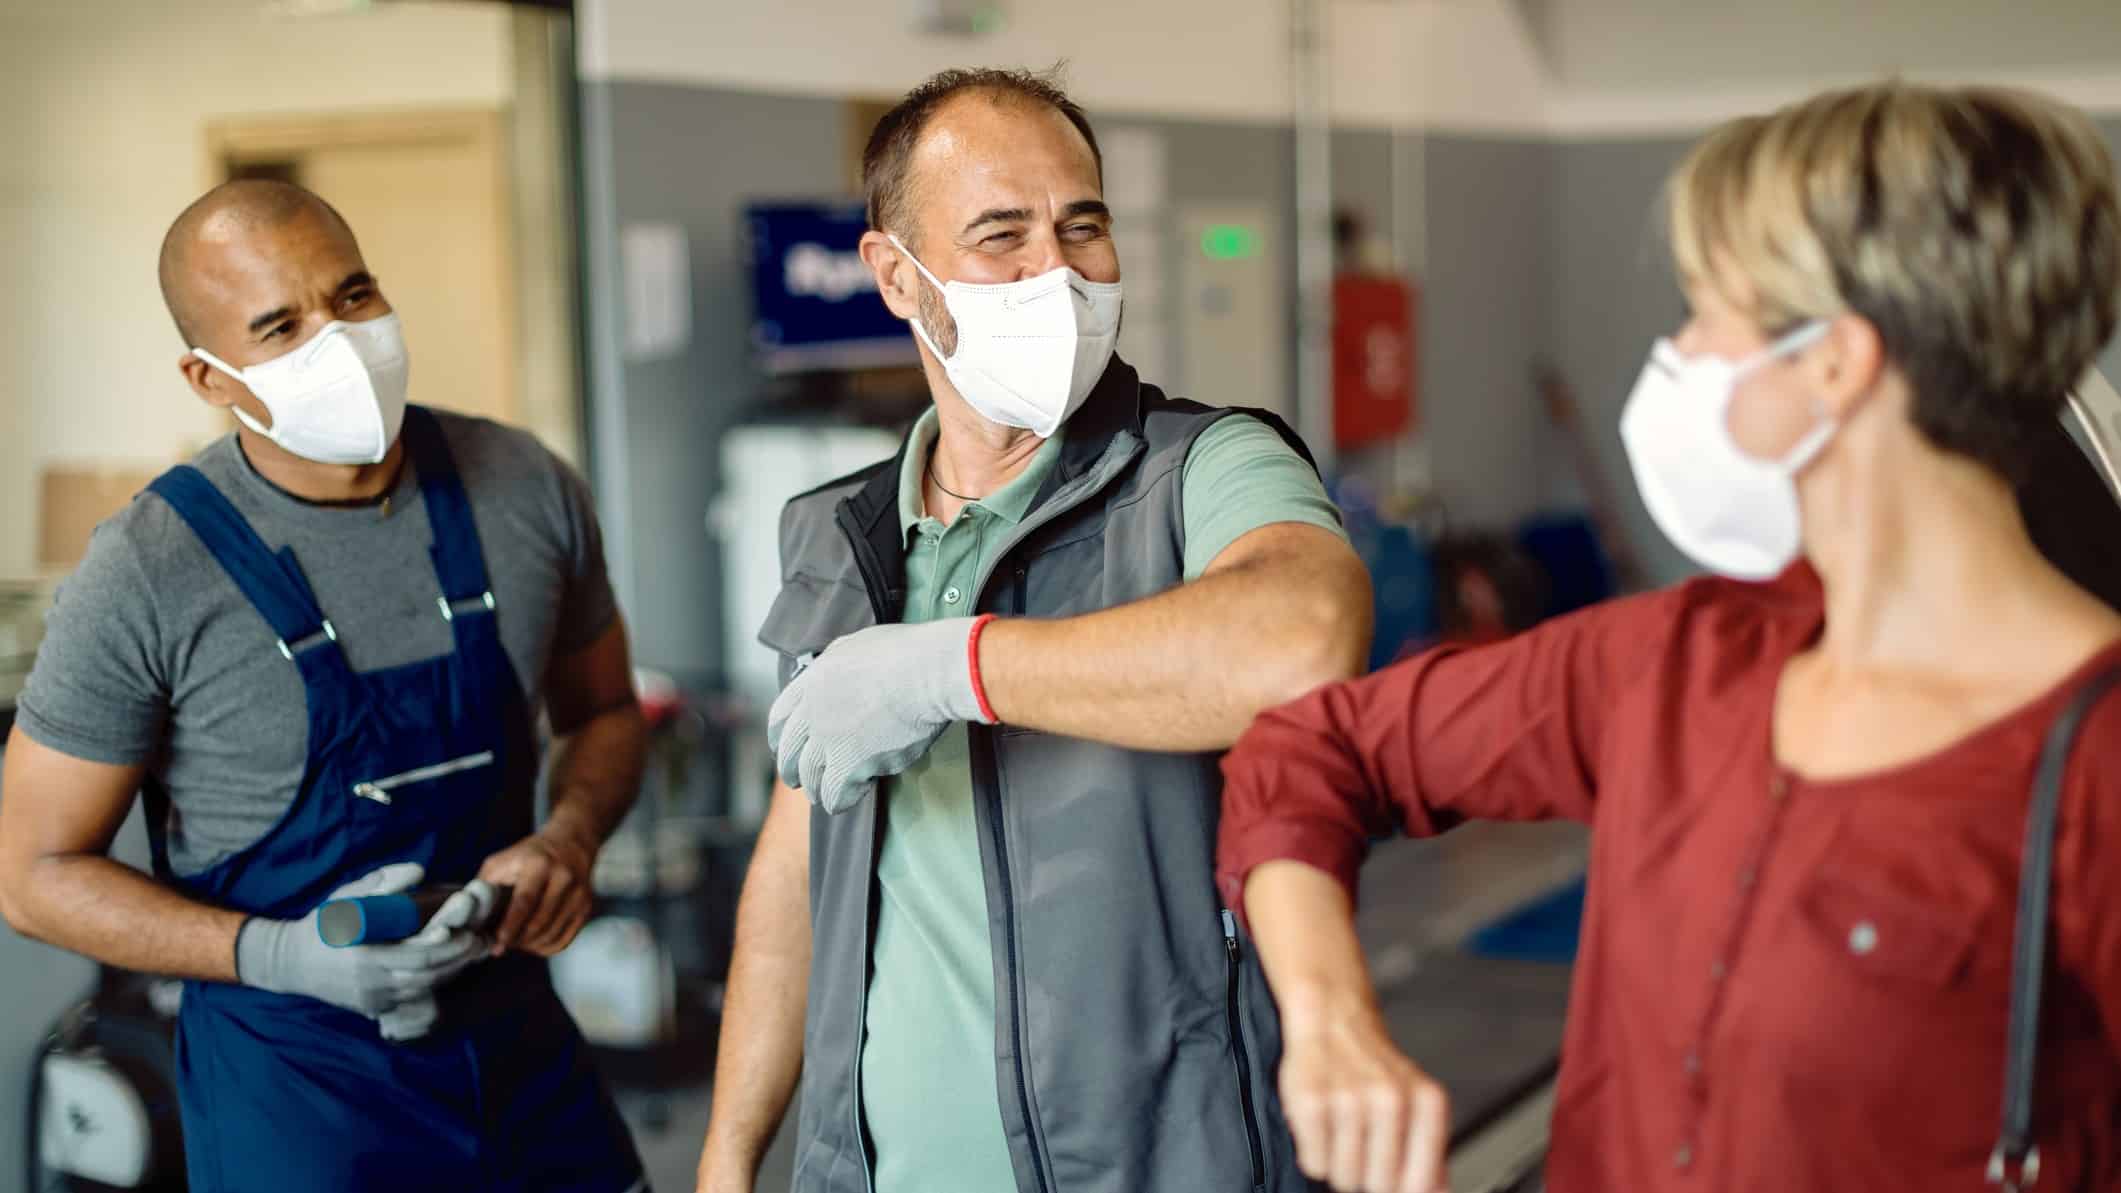 Workers wearing COVID protections mask bump elbows,indicating business still goes on